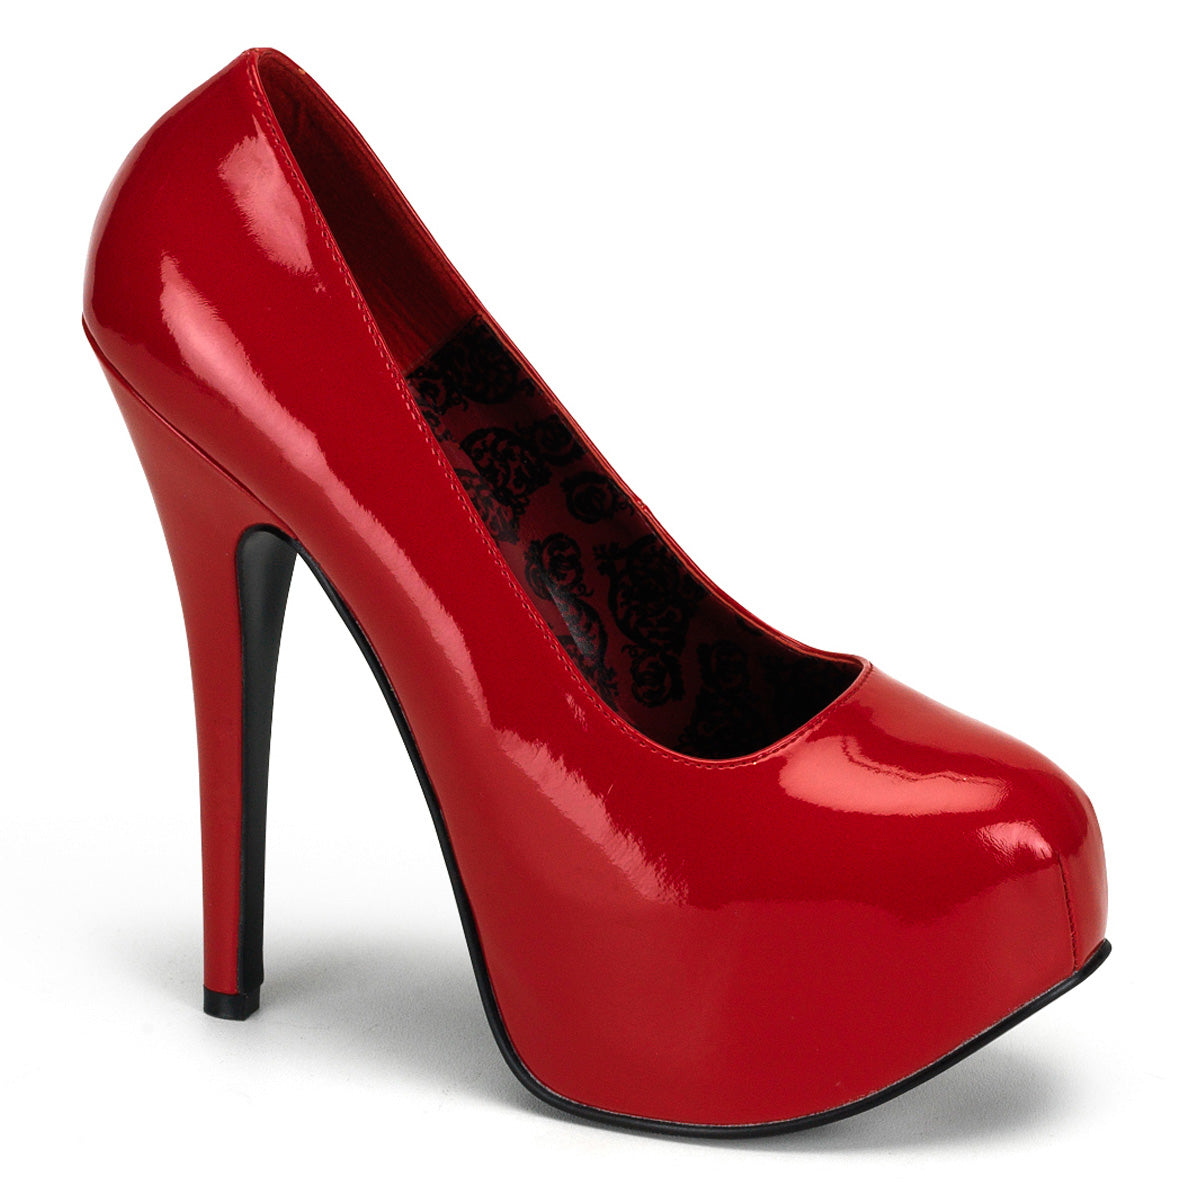 TEEZE-06W Pleaser Large Size Ladies Shoes 6 Inch Heel Red Platform Shoes